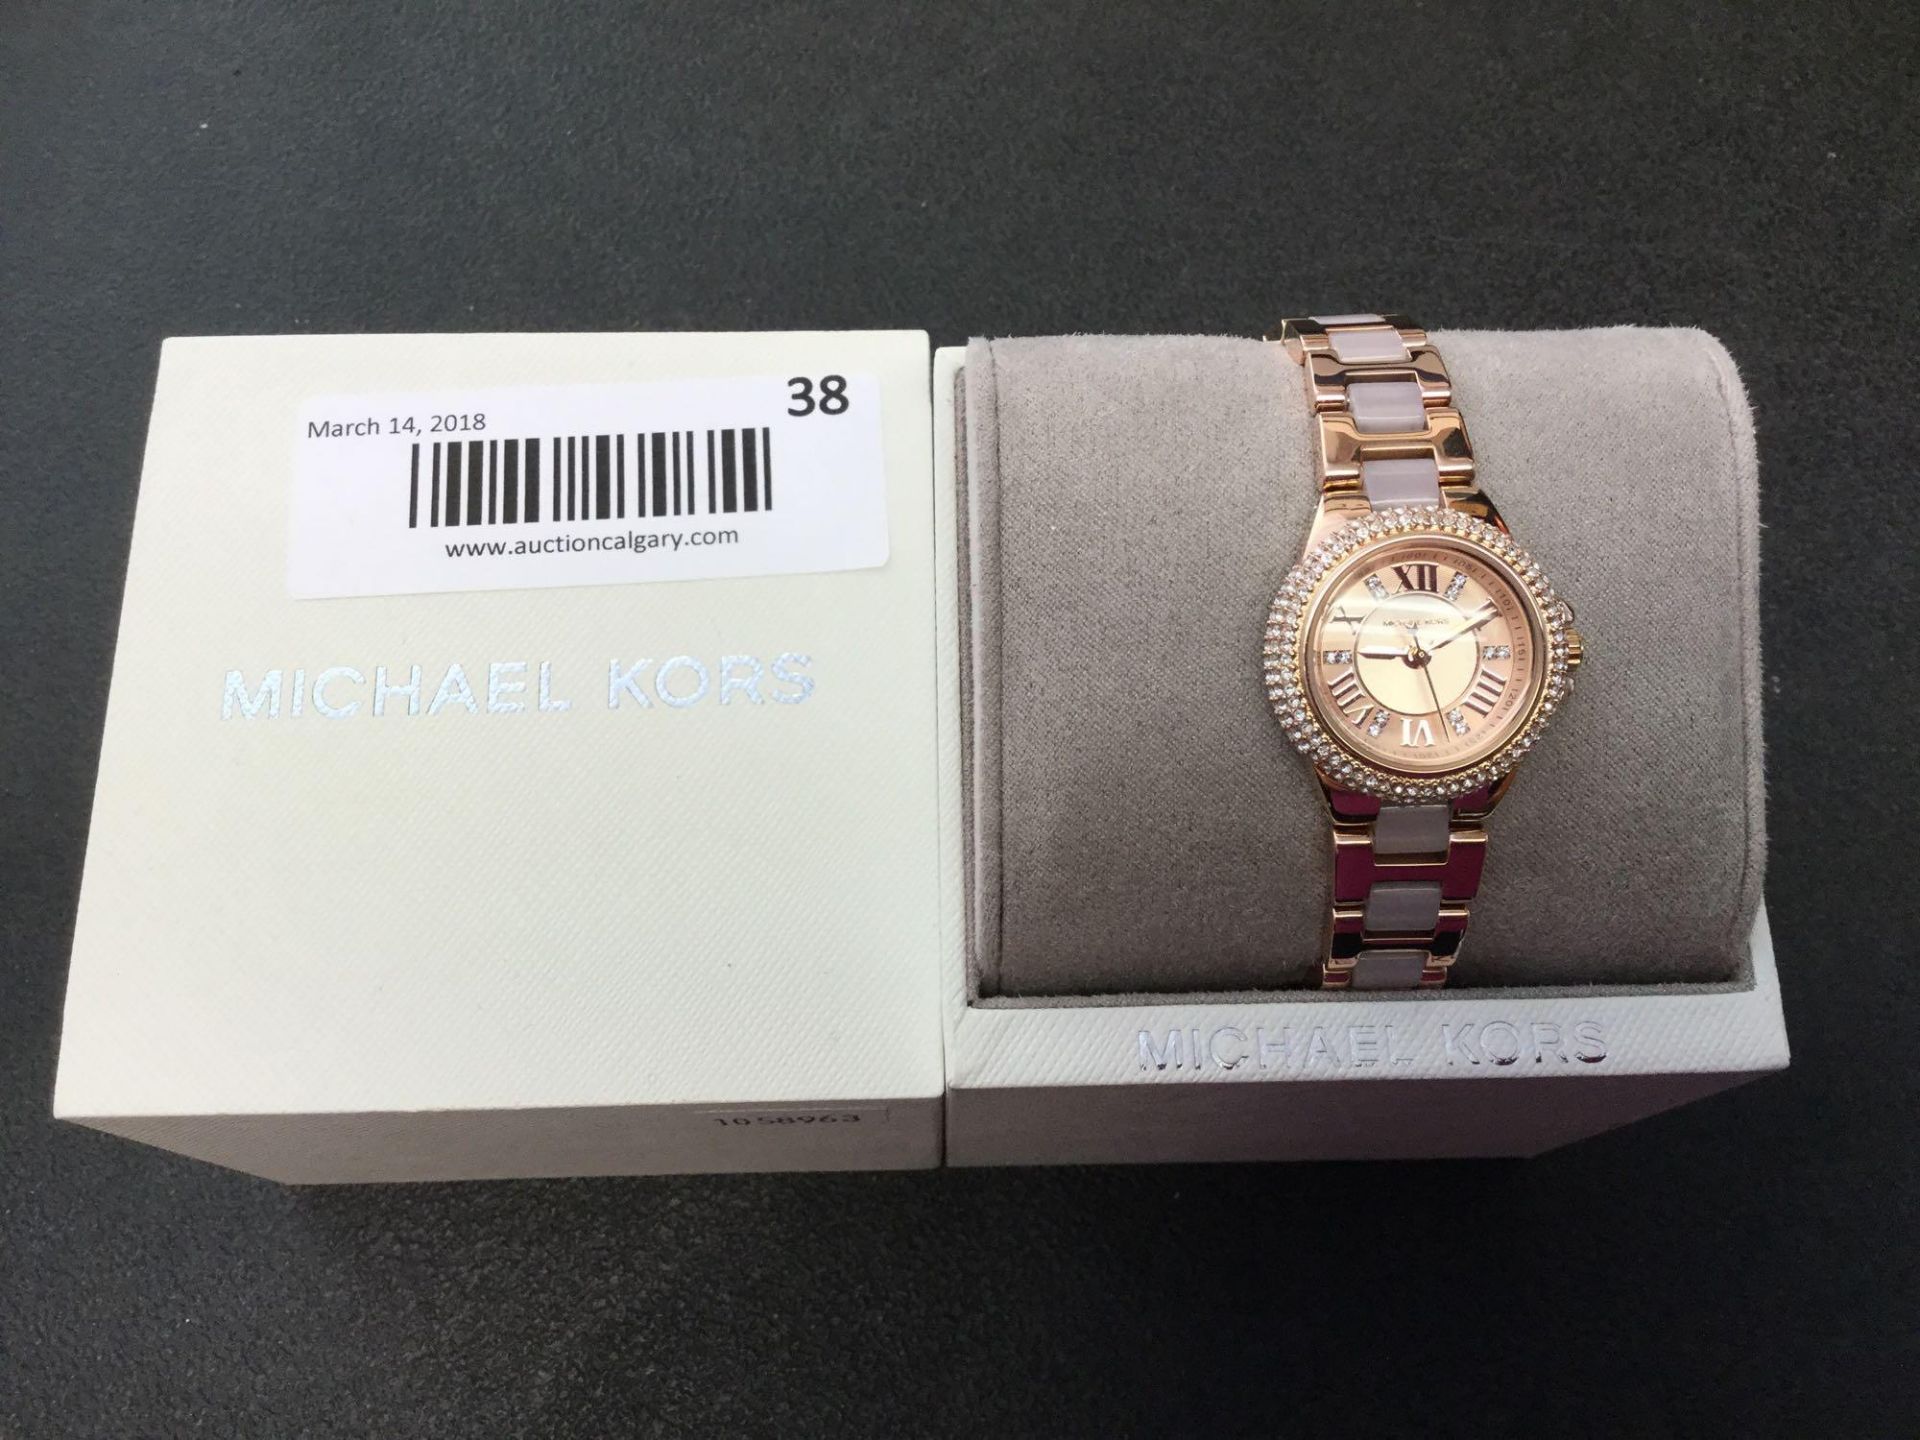 Michael Kors Women's watch - Copper tone Face and Band - Box Included